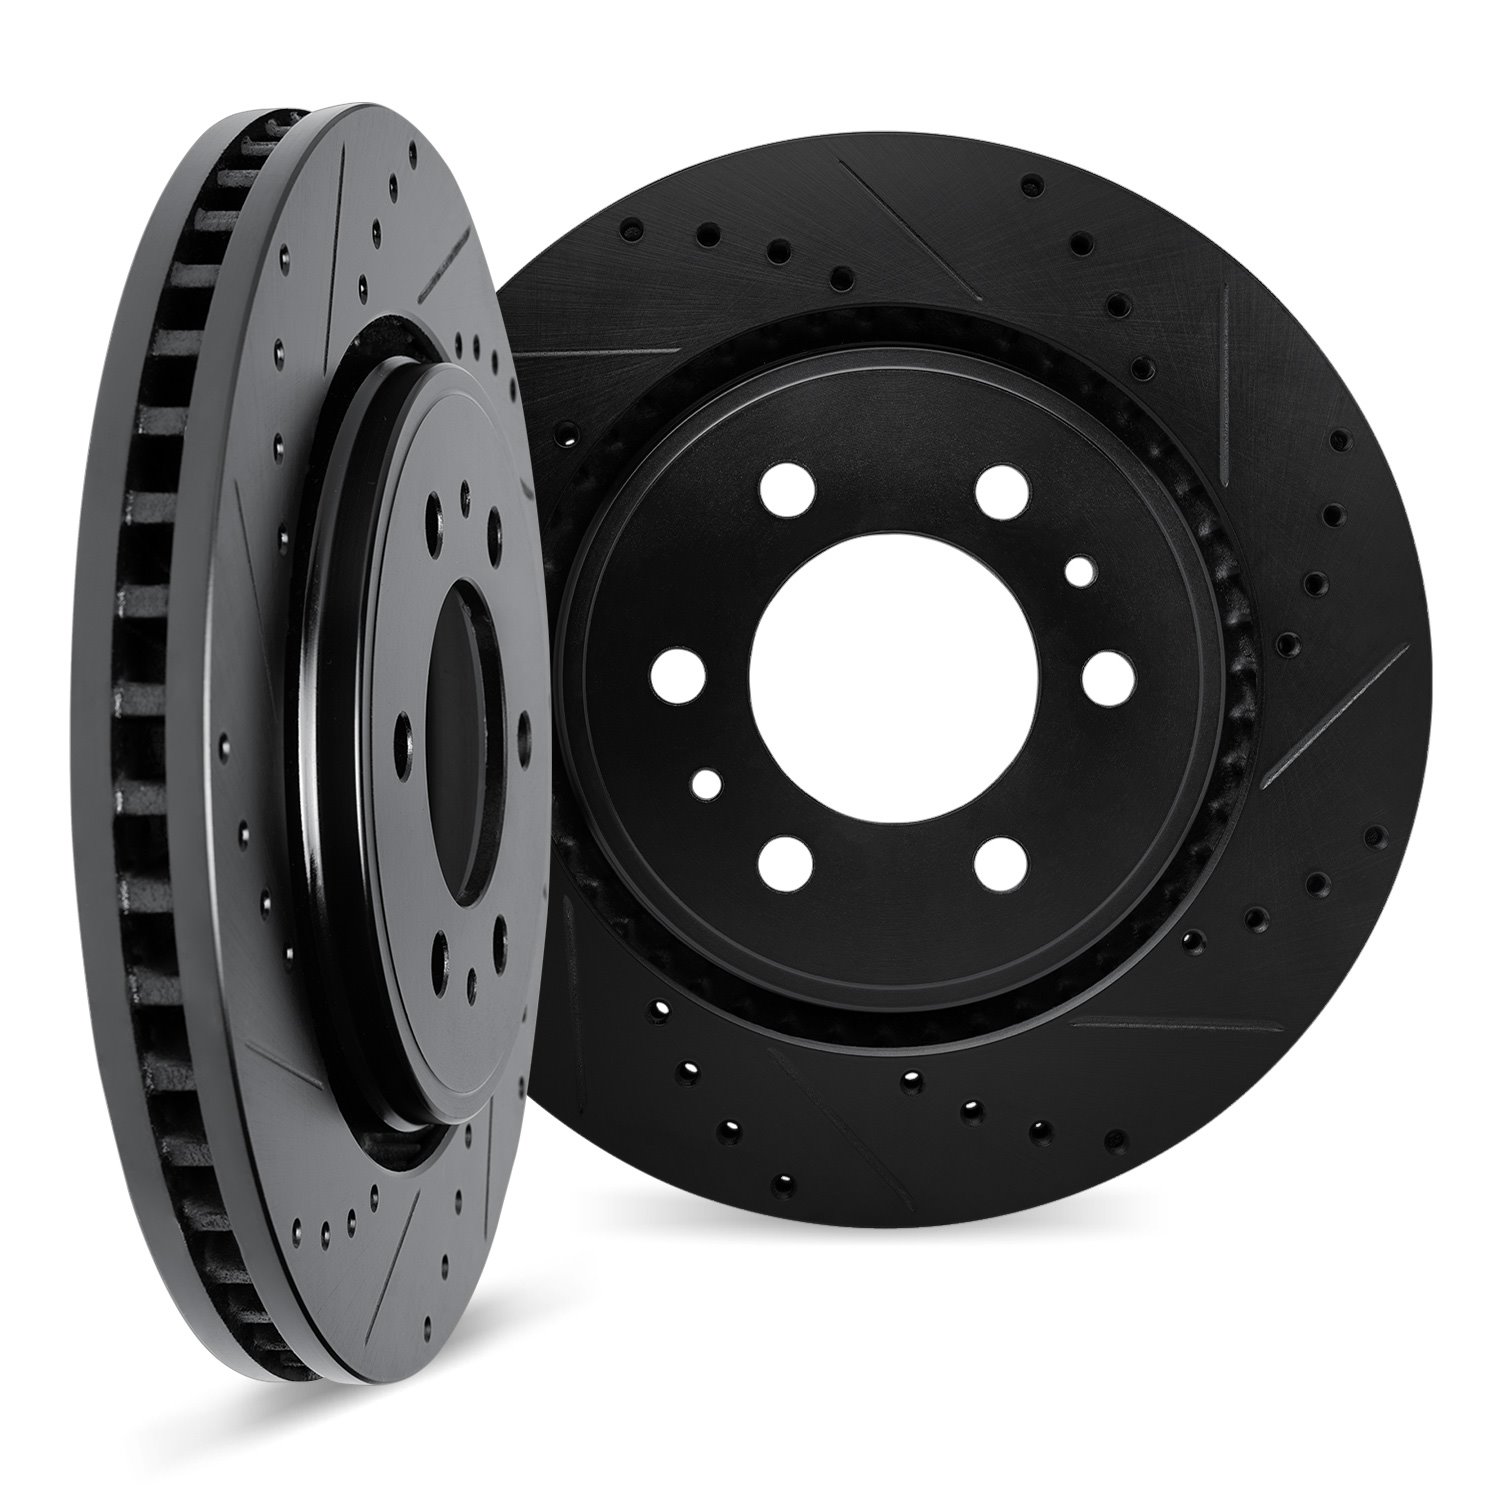 8002-47072 Drilled/Slotted Brake Rotors [Black], Fits Select GM, Position: Front